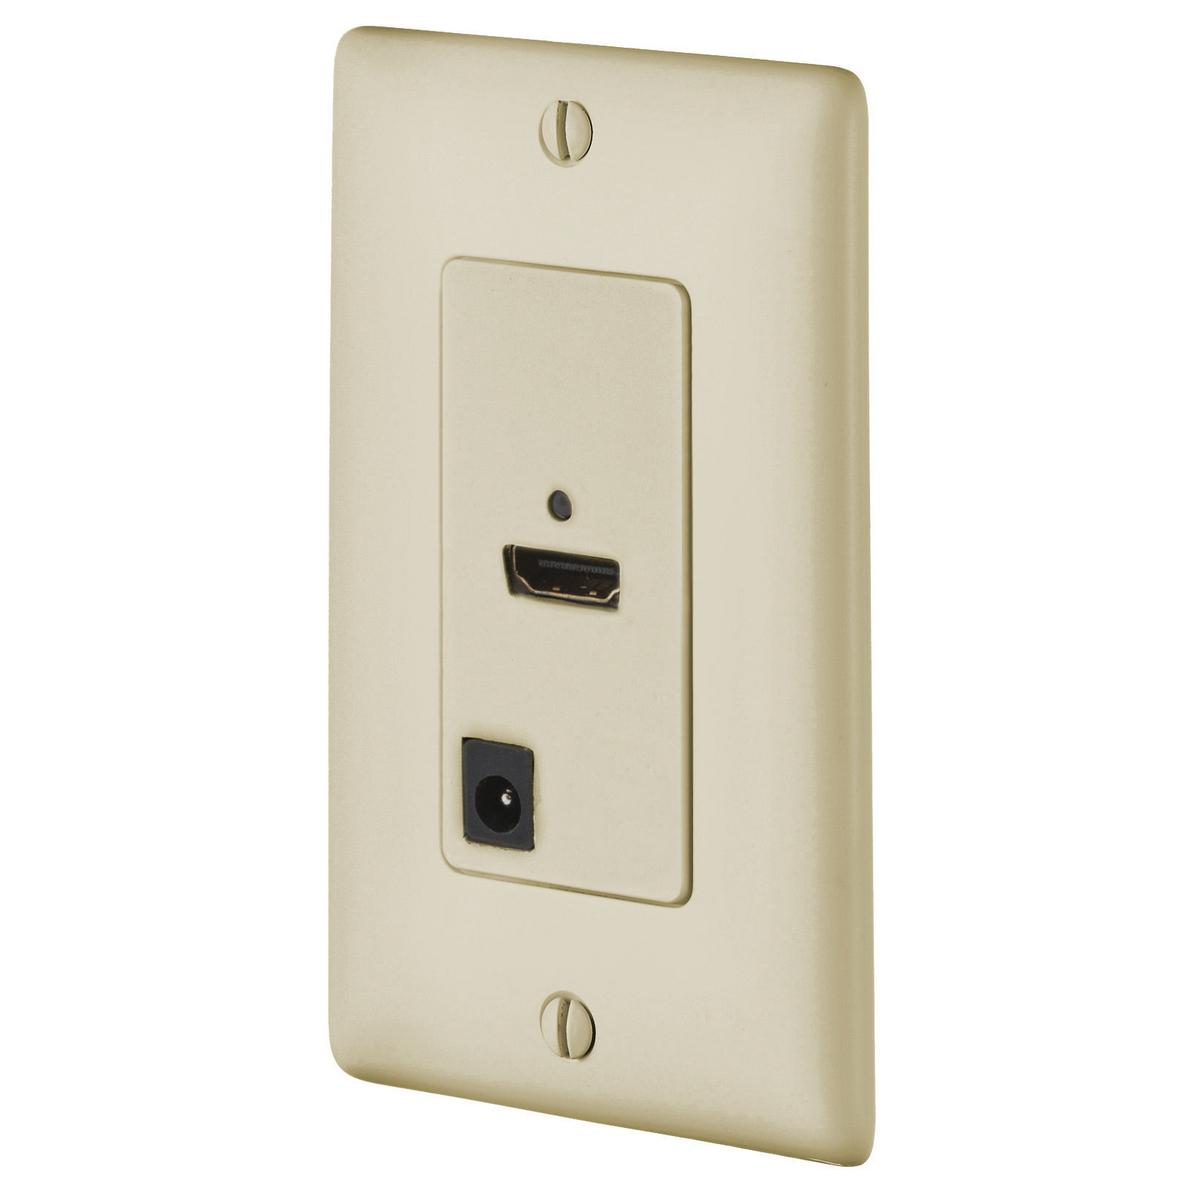 Hubbell ISFH110EI Plate, Decorator Frame, HDMI, 110 Termination, Set, Active, Electric Ivory  ; Locate a display device up to 150’ away is as simple as pulling 2 additional UTP cables to a drop ; Terminate with Category 5e, 6 or 6A UTP plenum or non-plenum cable ; Standard